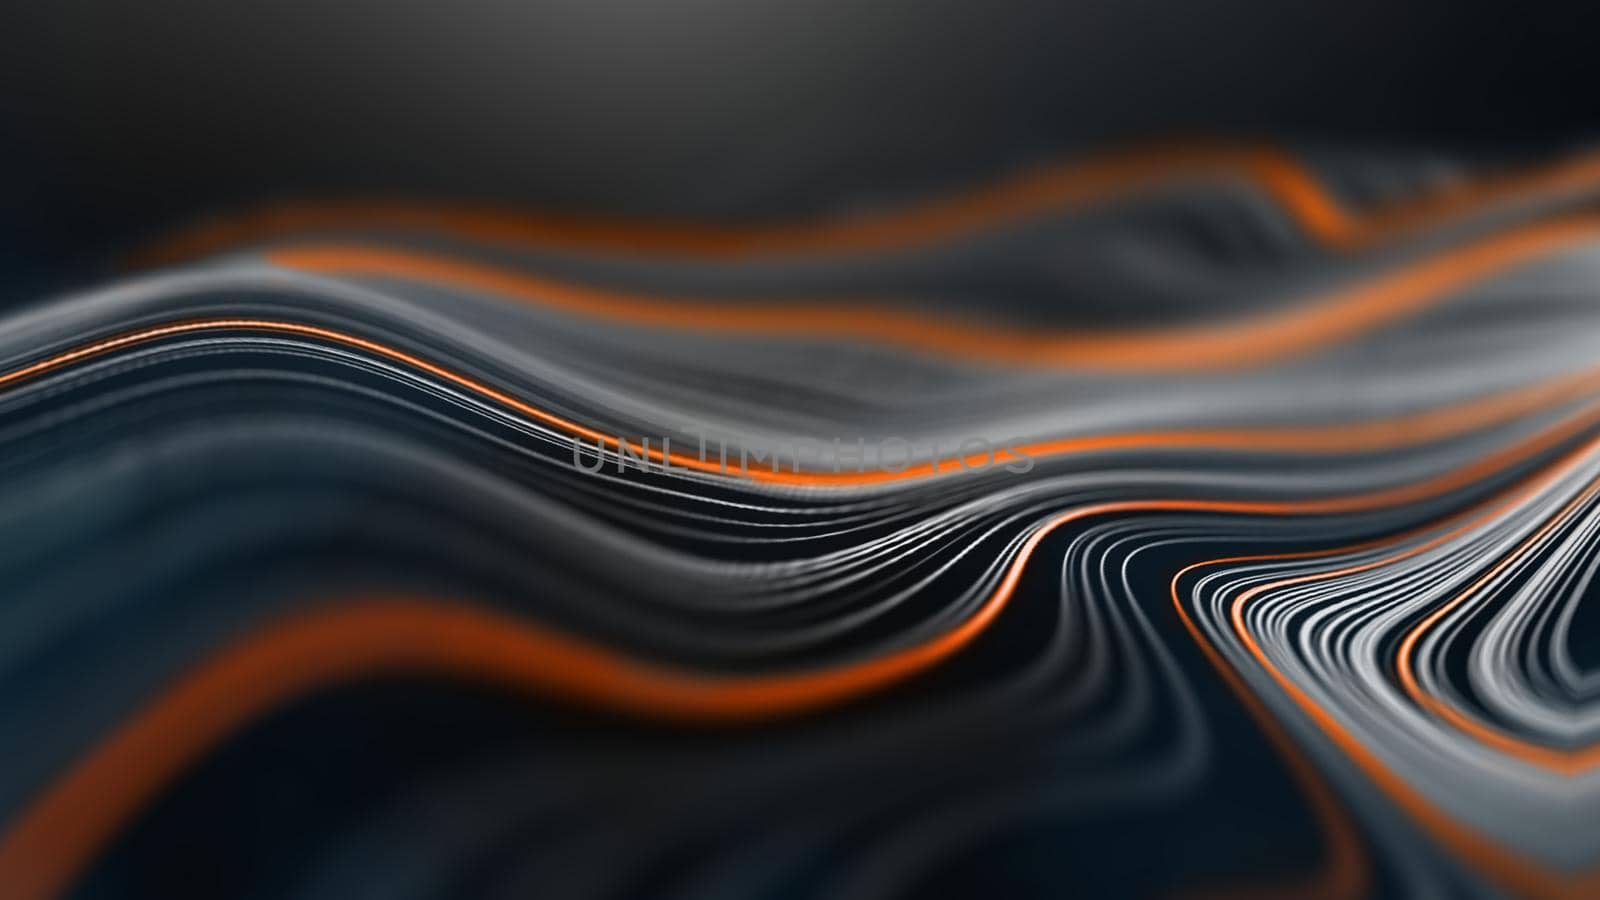 Dark technology background with wavy orange and white lines. Wavy black texture color design illustration. Digital motion modern orange wallpaper template with curve abstract wave.